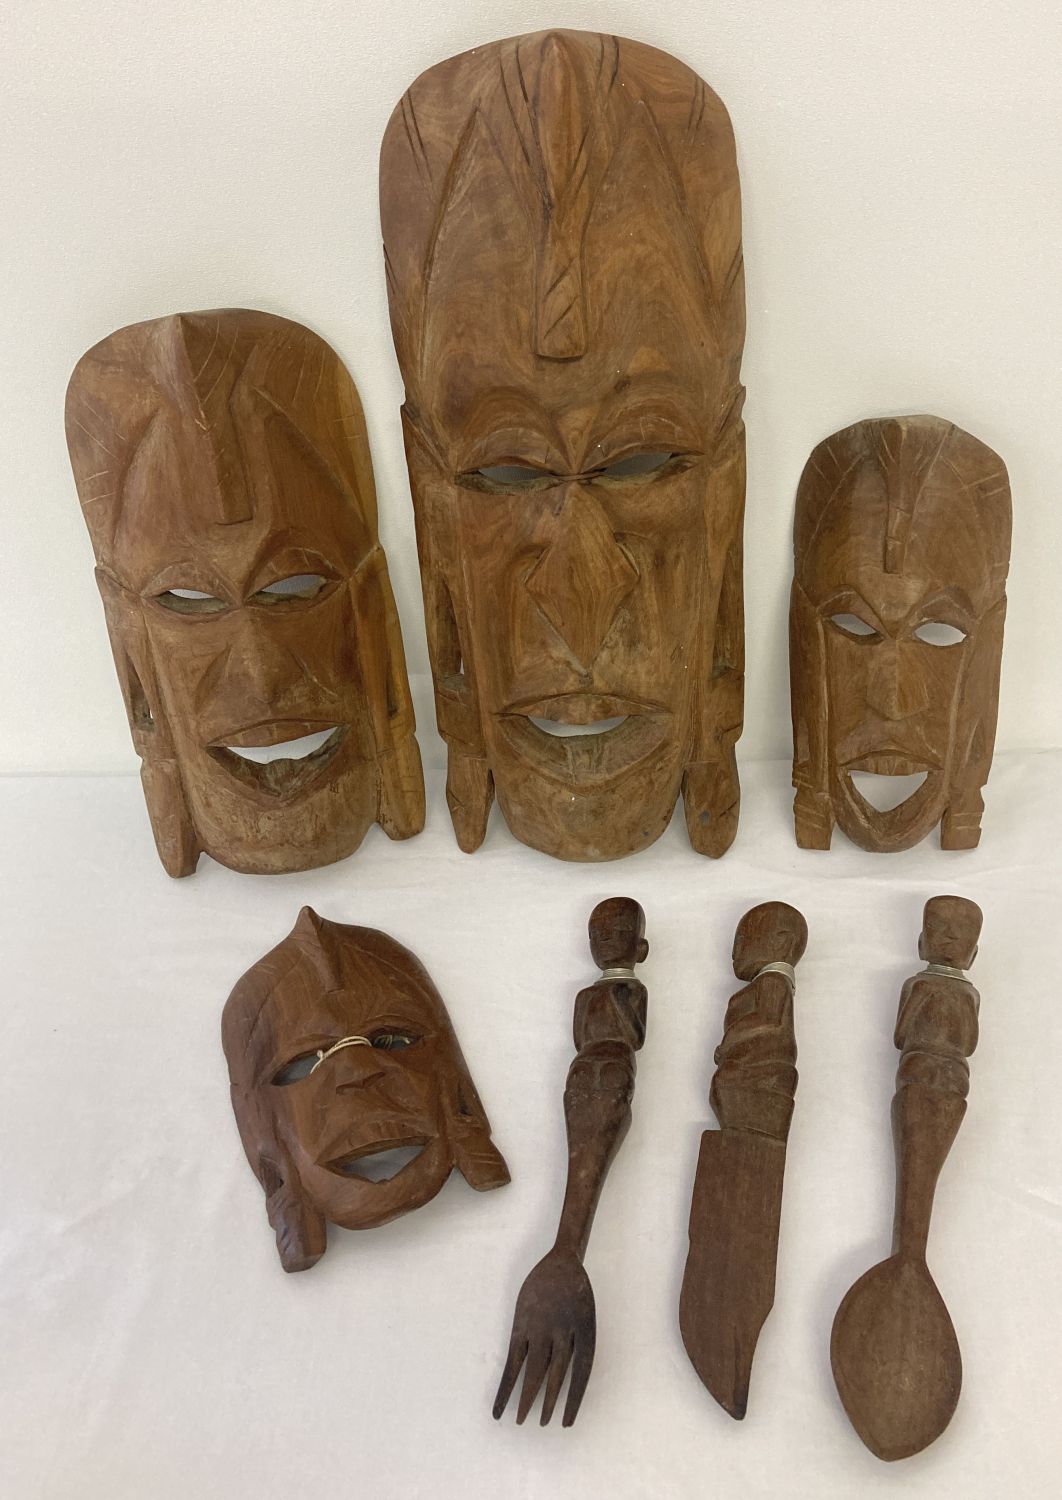 A collection of African carved wooden tribal items.